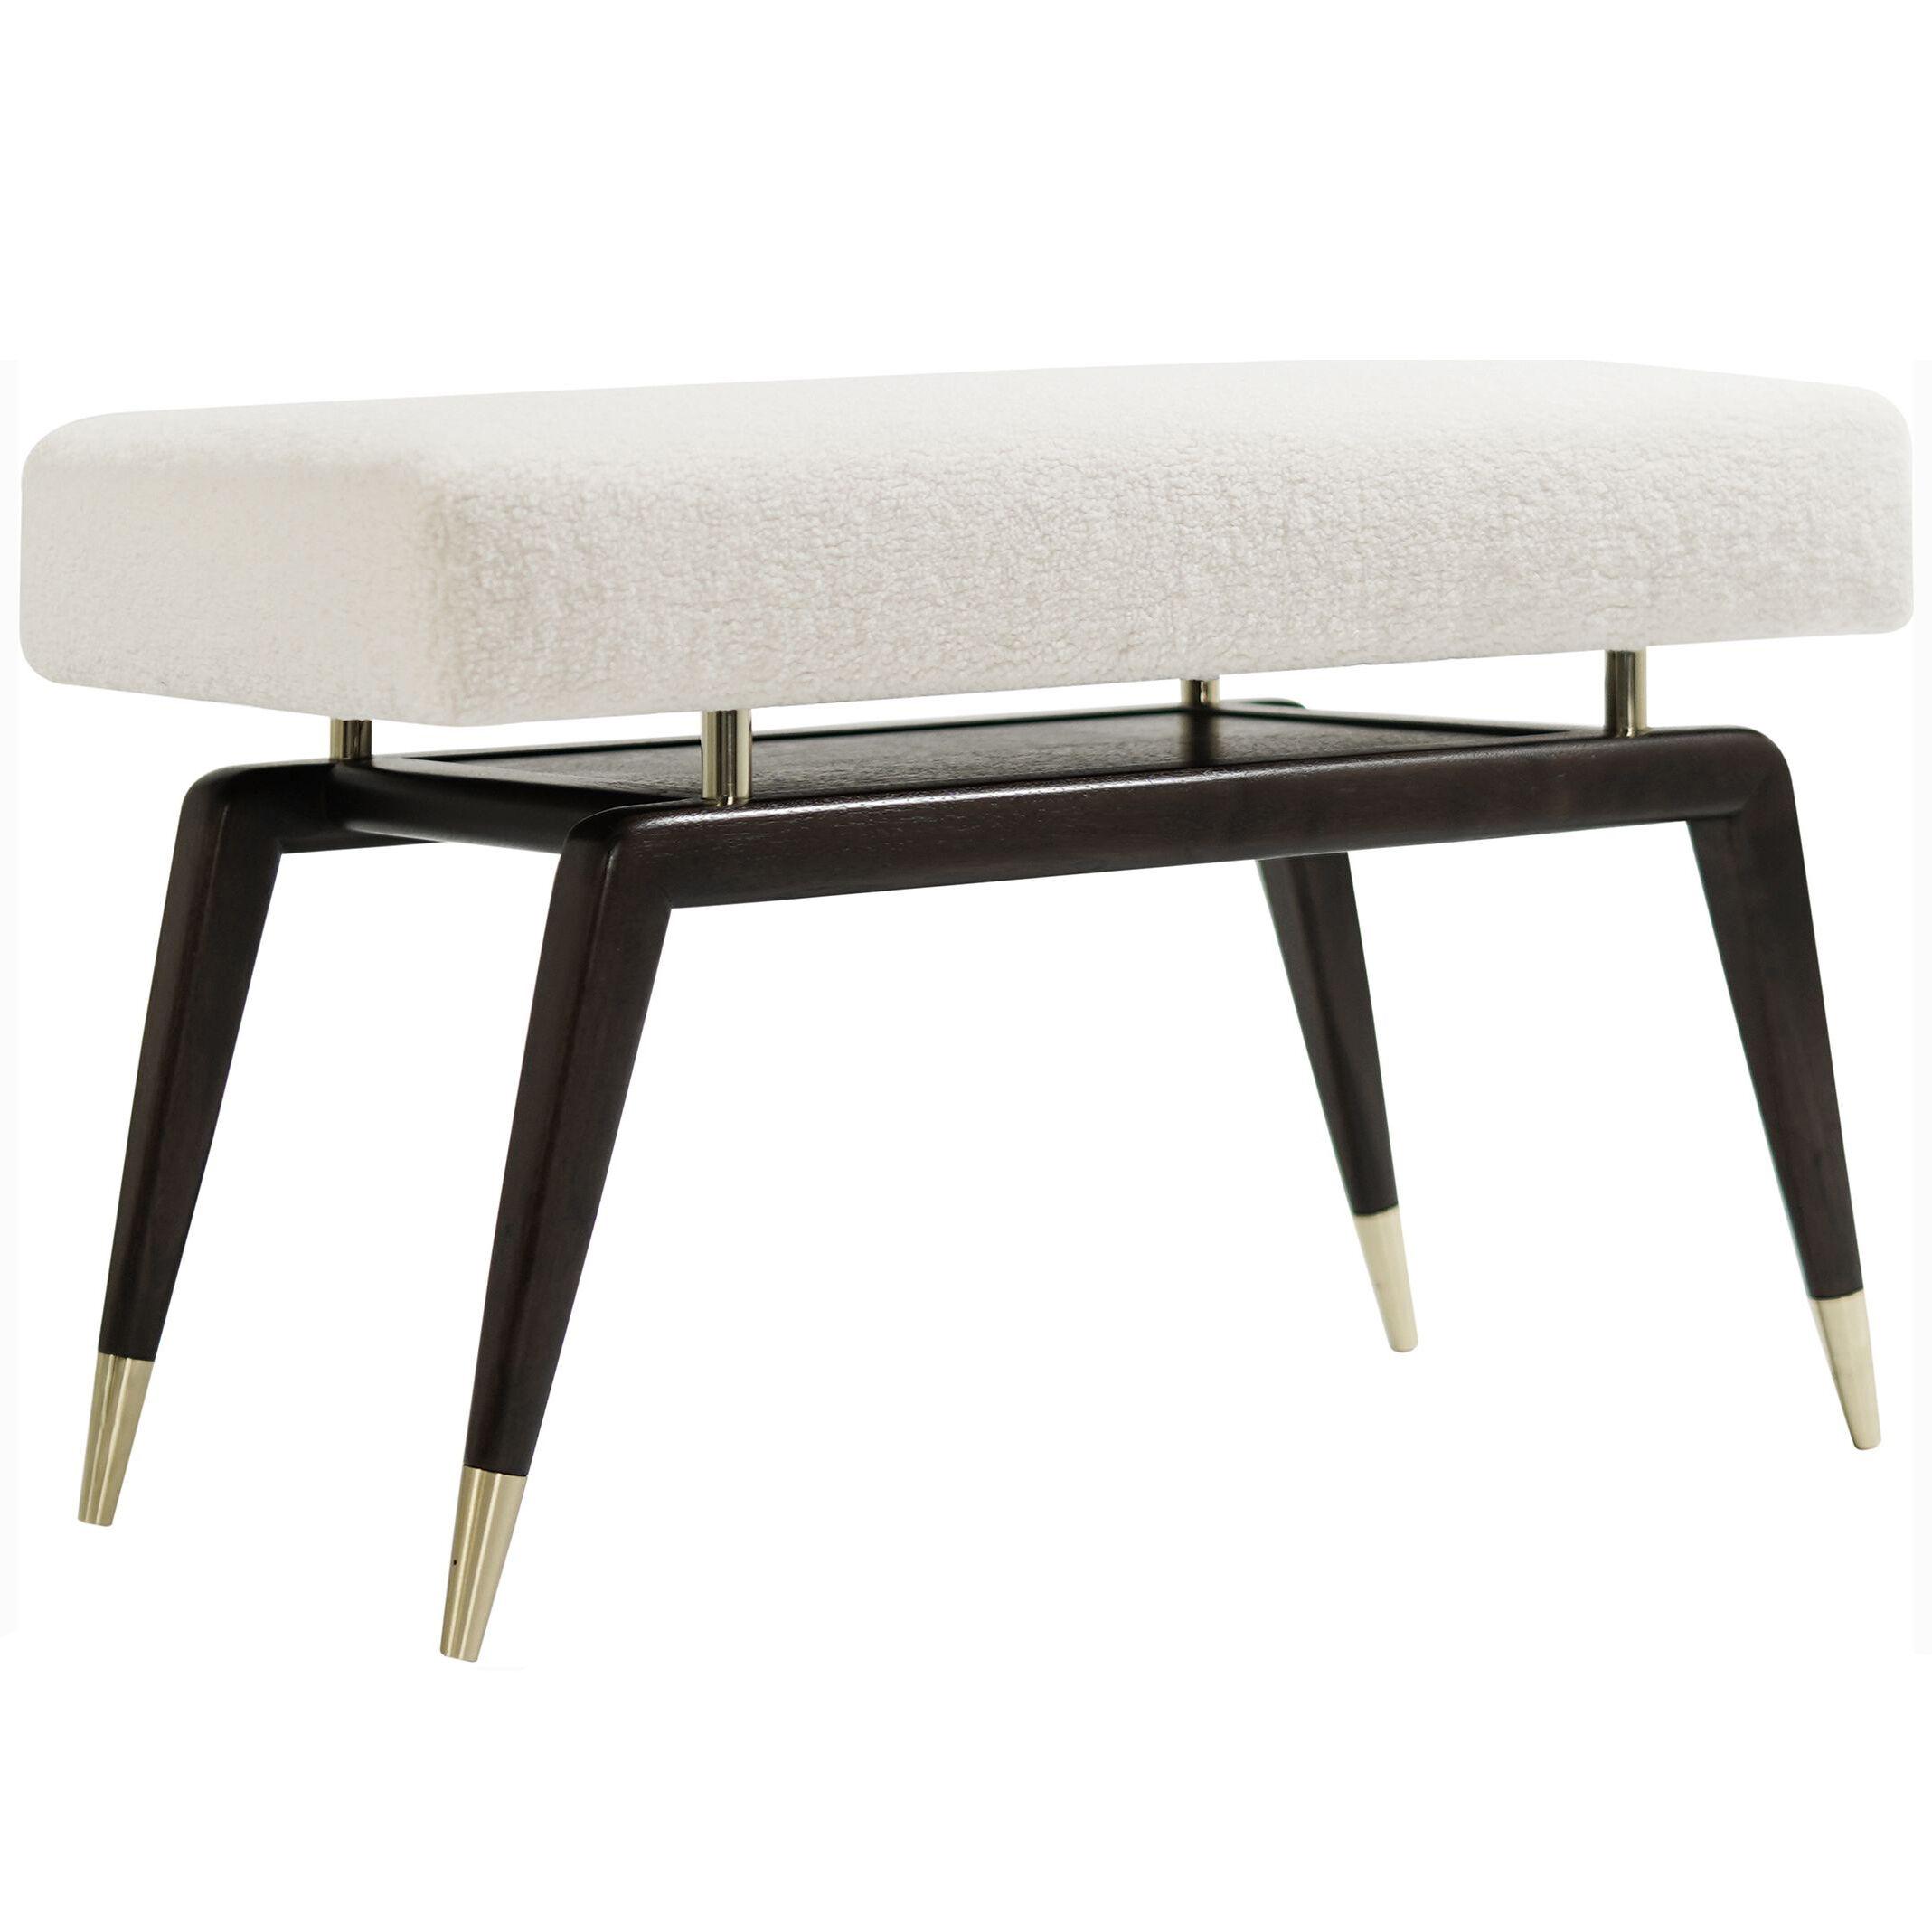 Gio "Piano" Bench by Stamford Modern